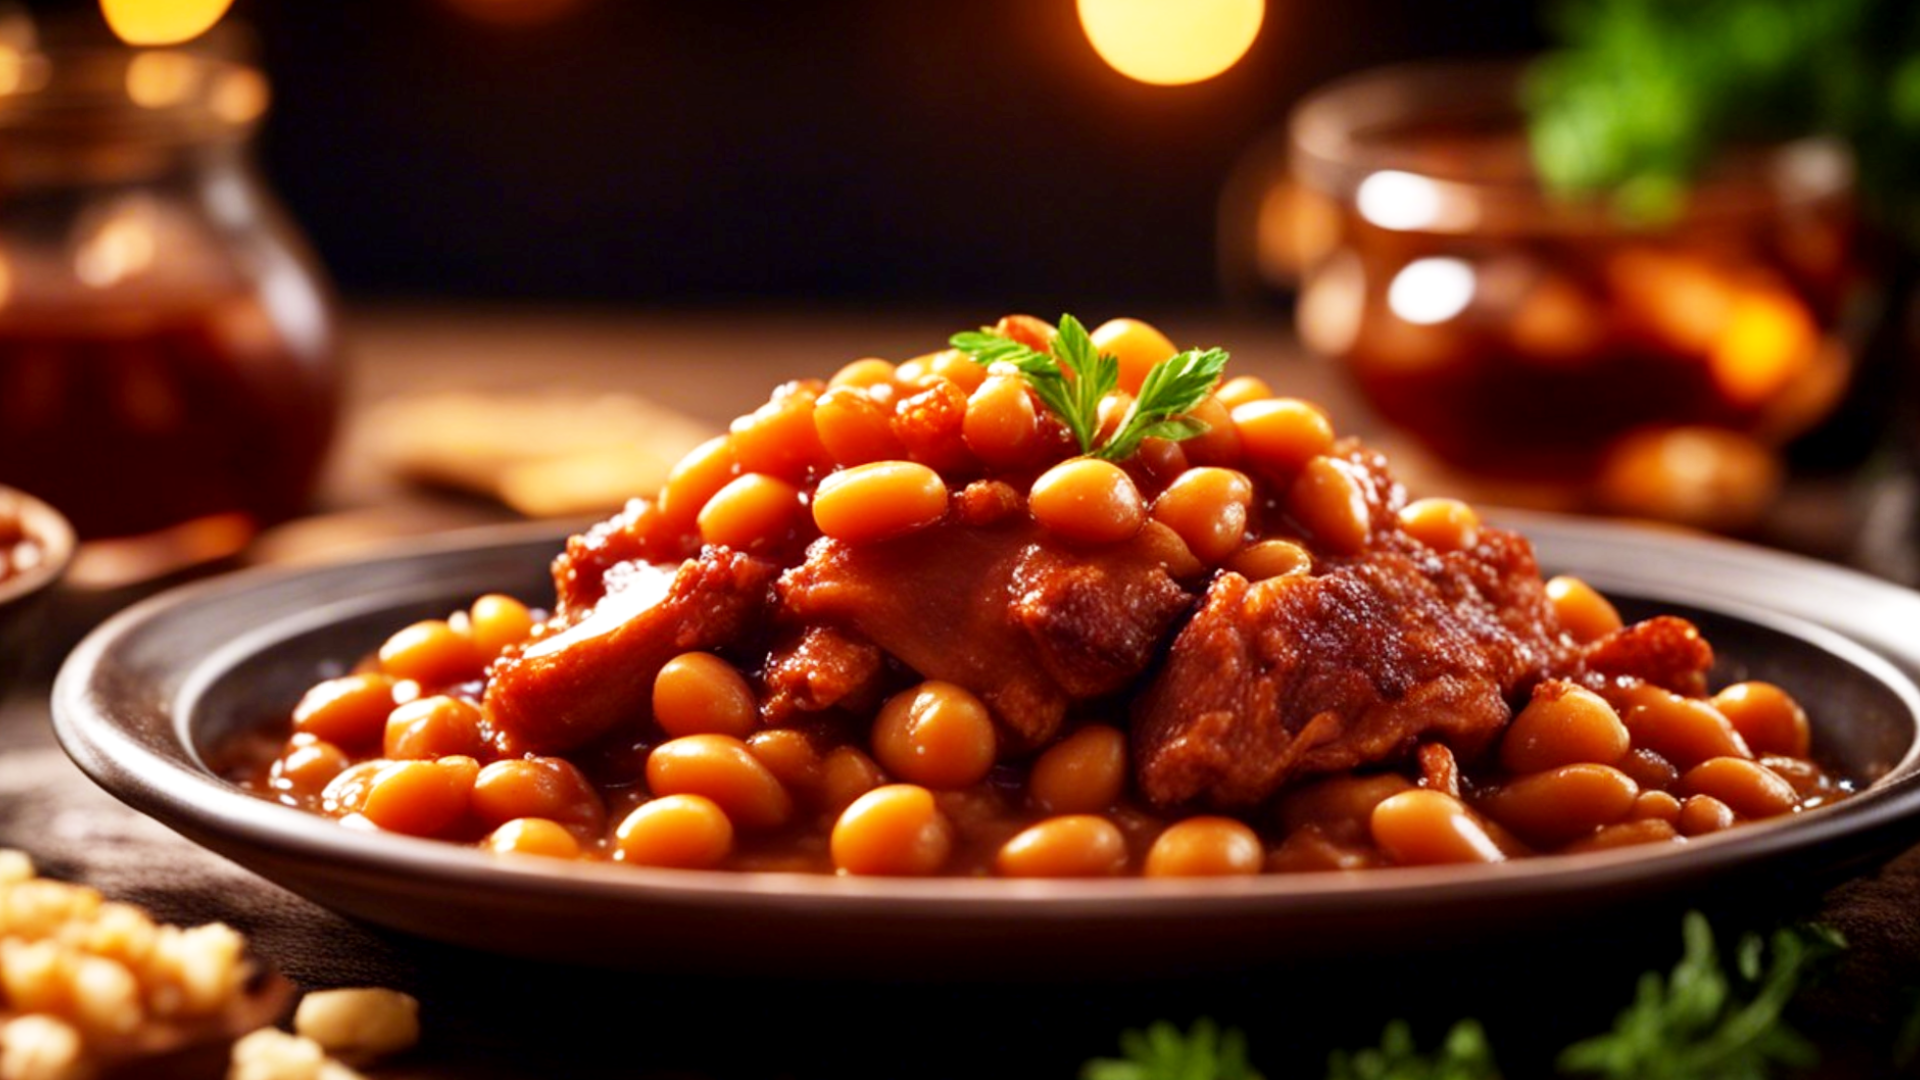 Homemade Baked Beans with Ham Hock